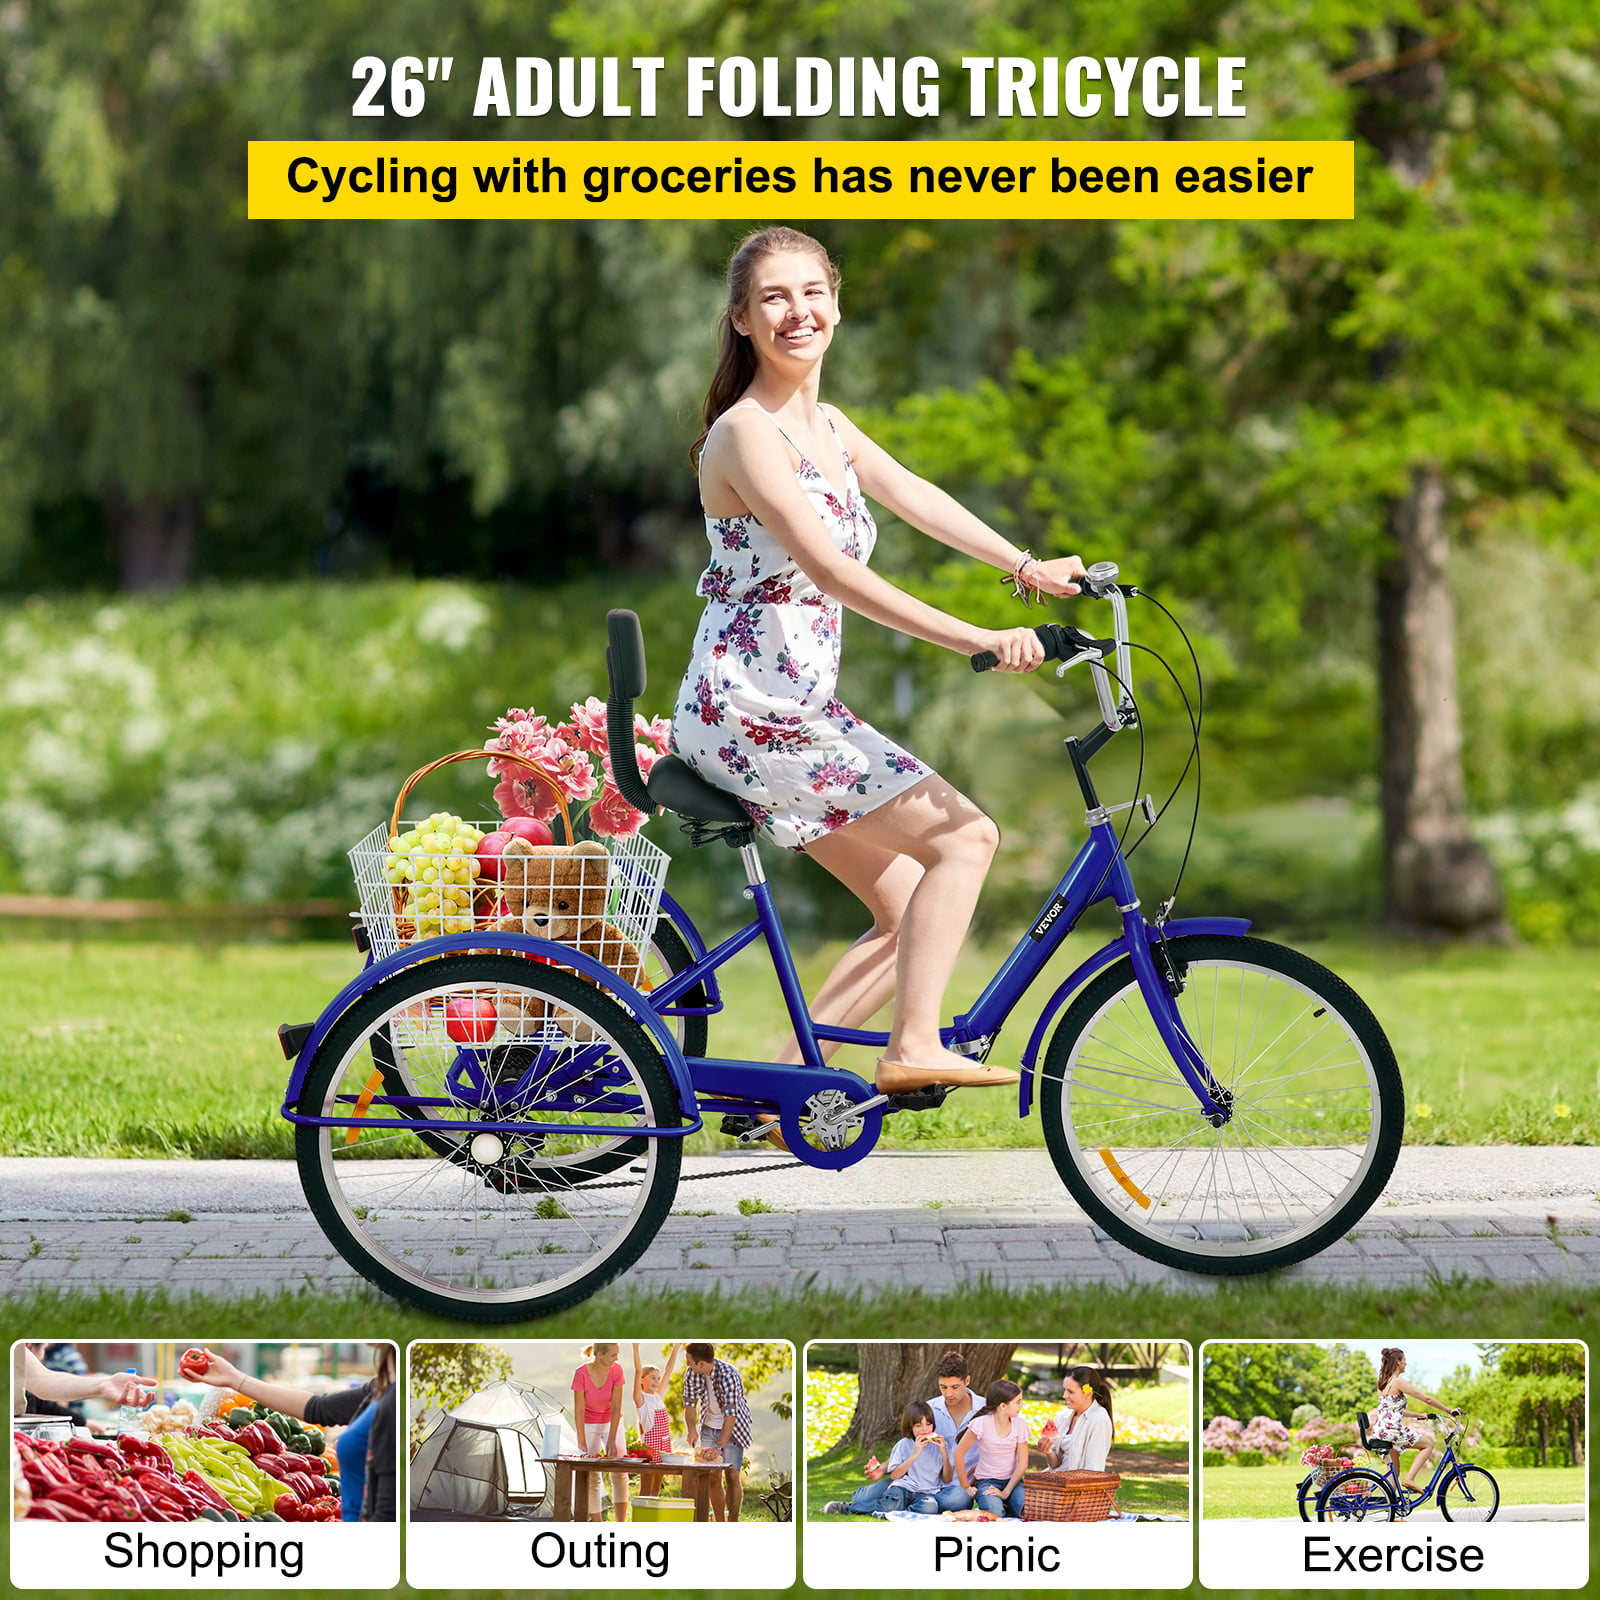 VEVOR Foldable Tricycle 26" Wheels, 7-Speed Trike, 3 Wheels Colorful Bike with Basket, Portable and Foldable Bicycle for Adults Exercise Shopping Picnic Outdoor Activities - image 2 of 9